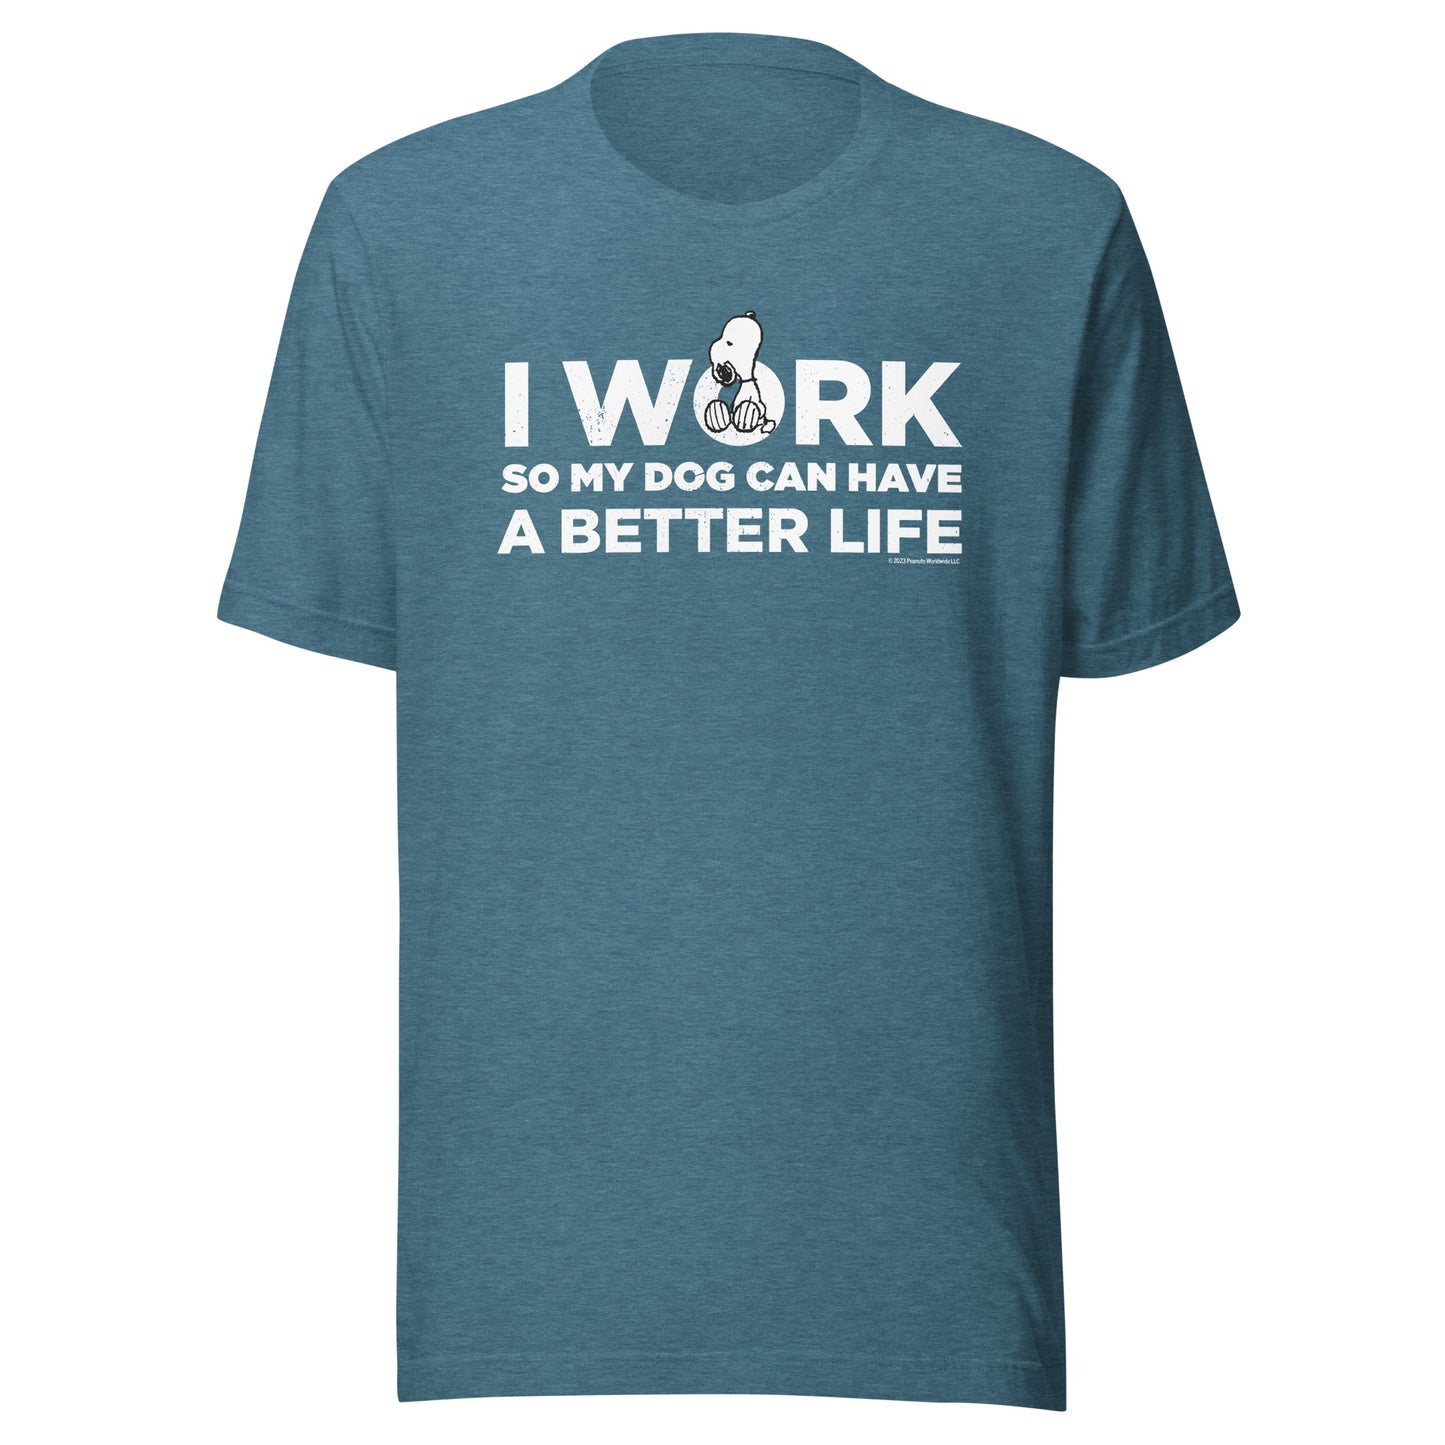 Snoopy I Work So My Dog Can Have A Better Life Adult T-Shirt